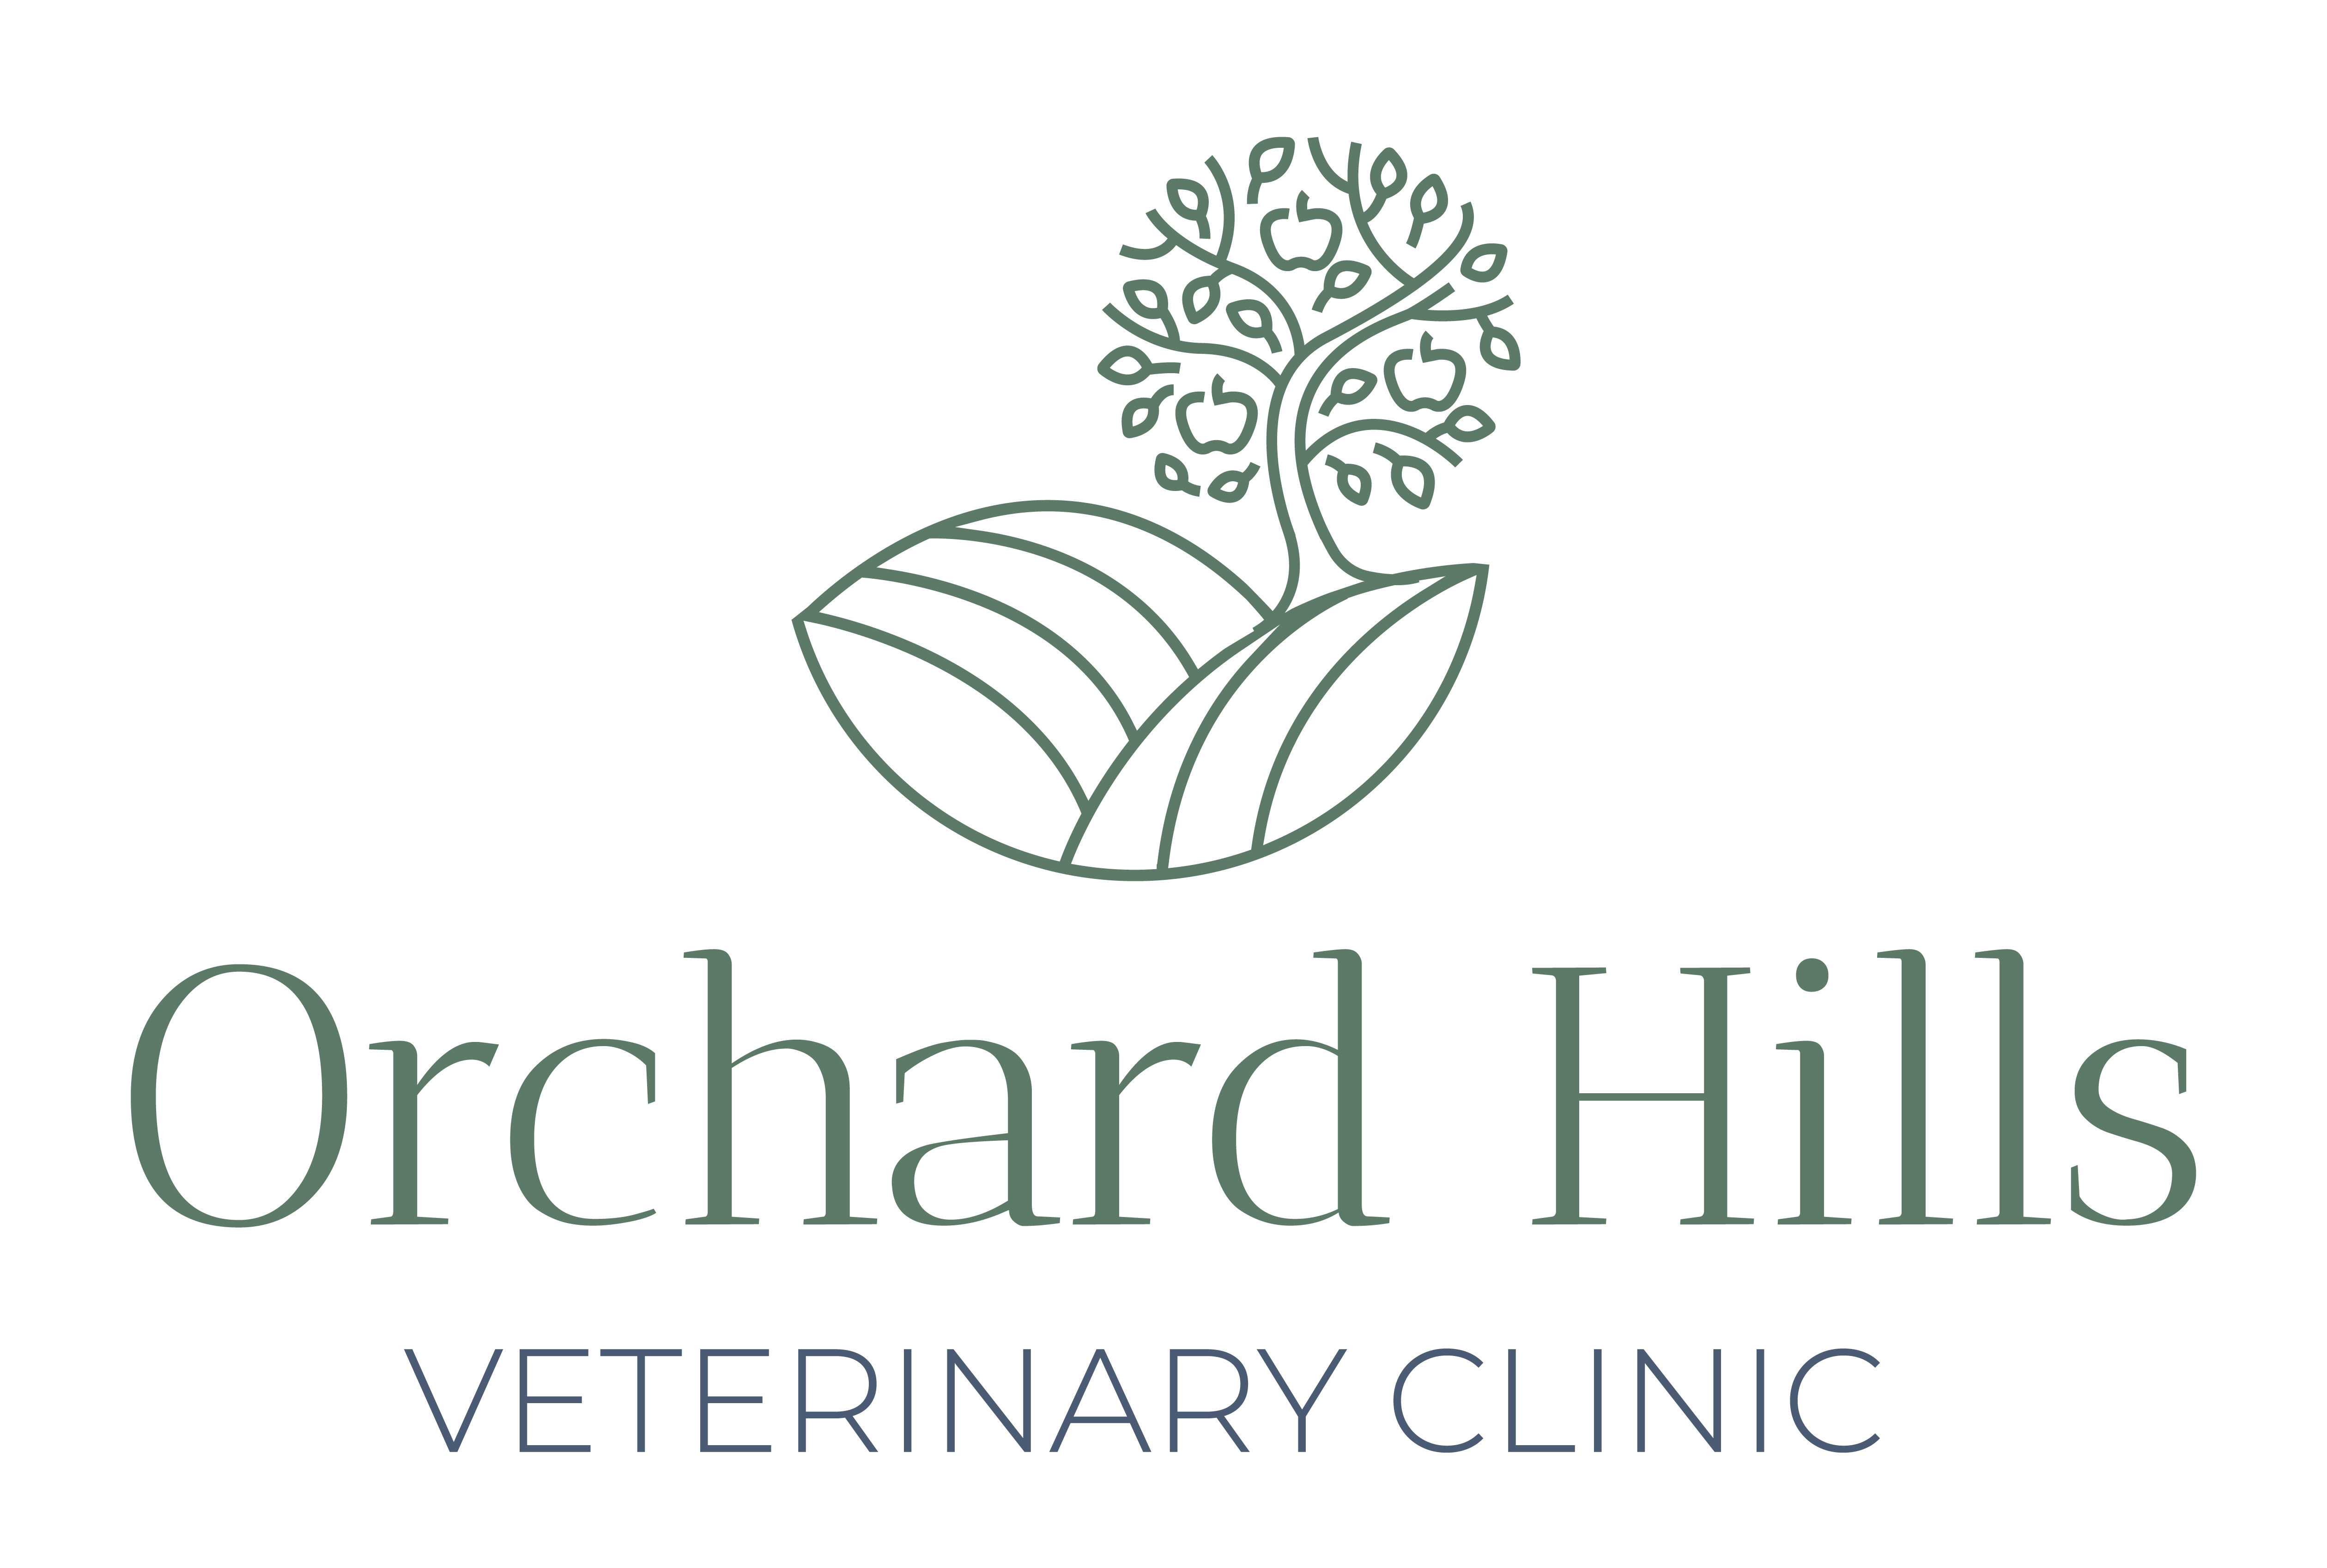 Orchard Hills Veterinary Clinic